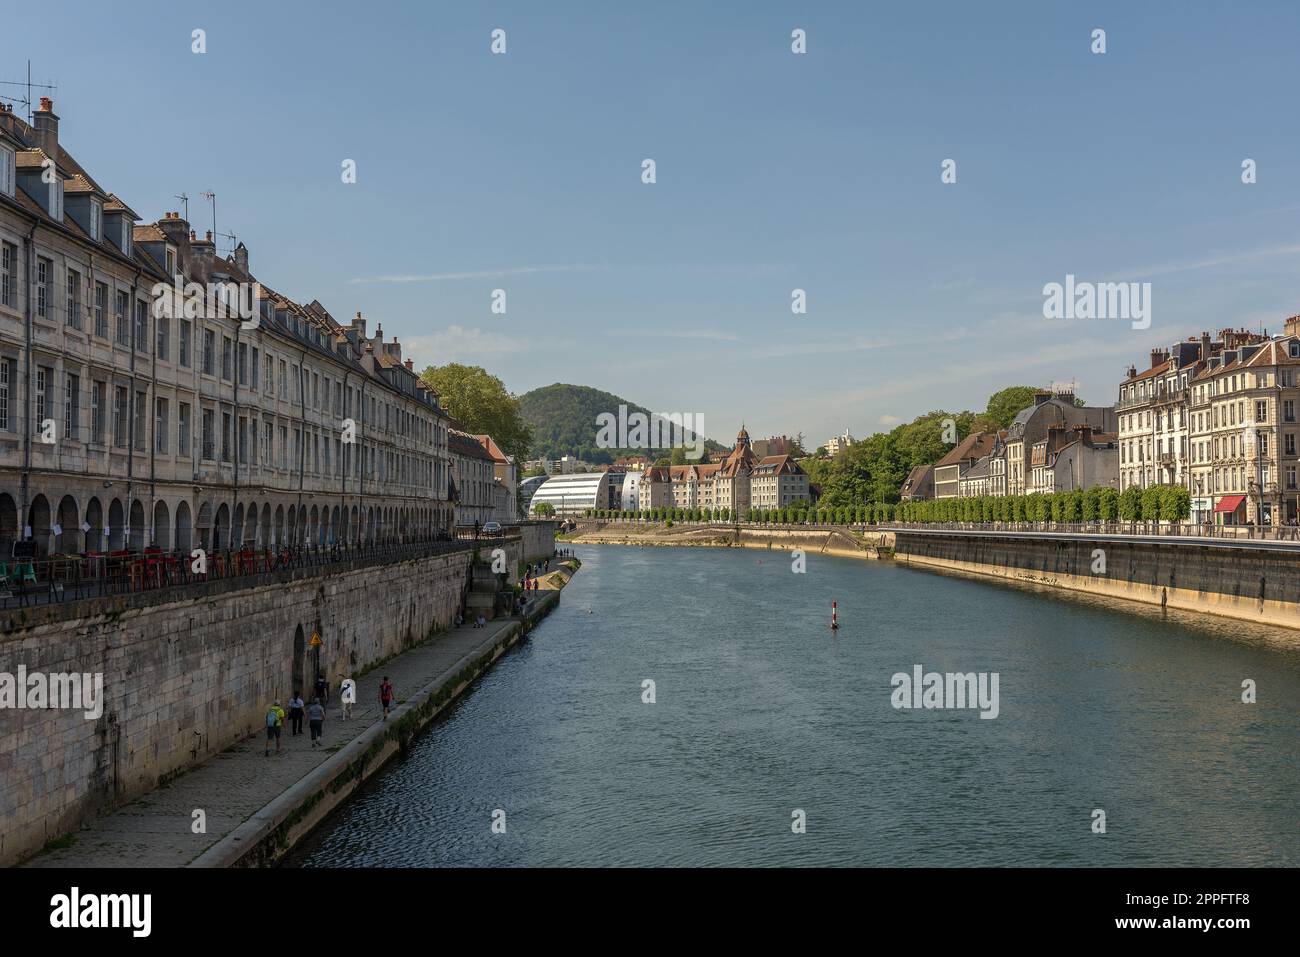 View of the front of houses on the banks of the River Doubs, Besancon, France Stock Photo